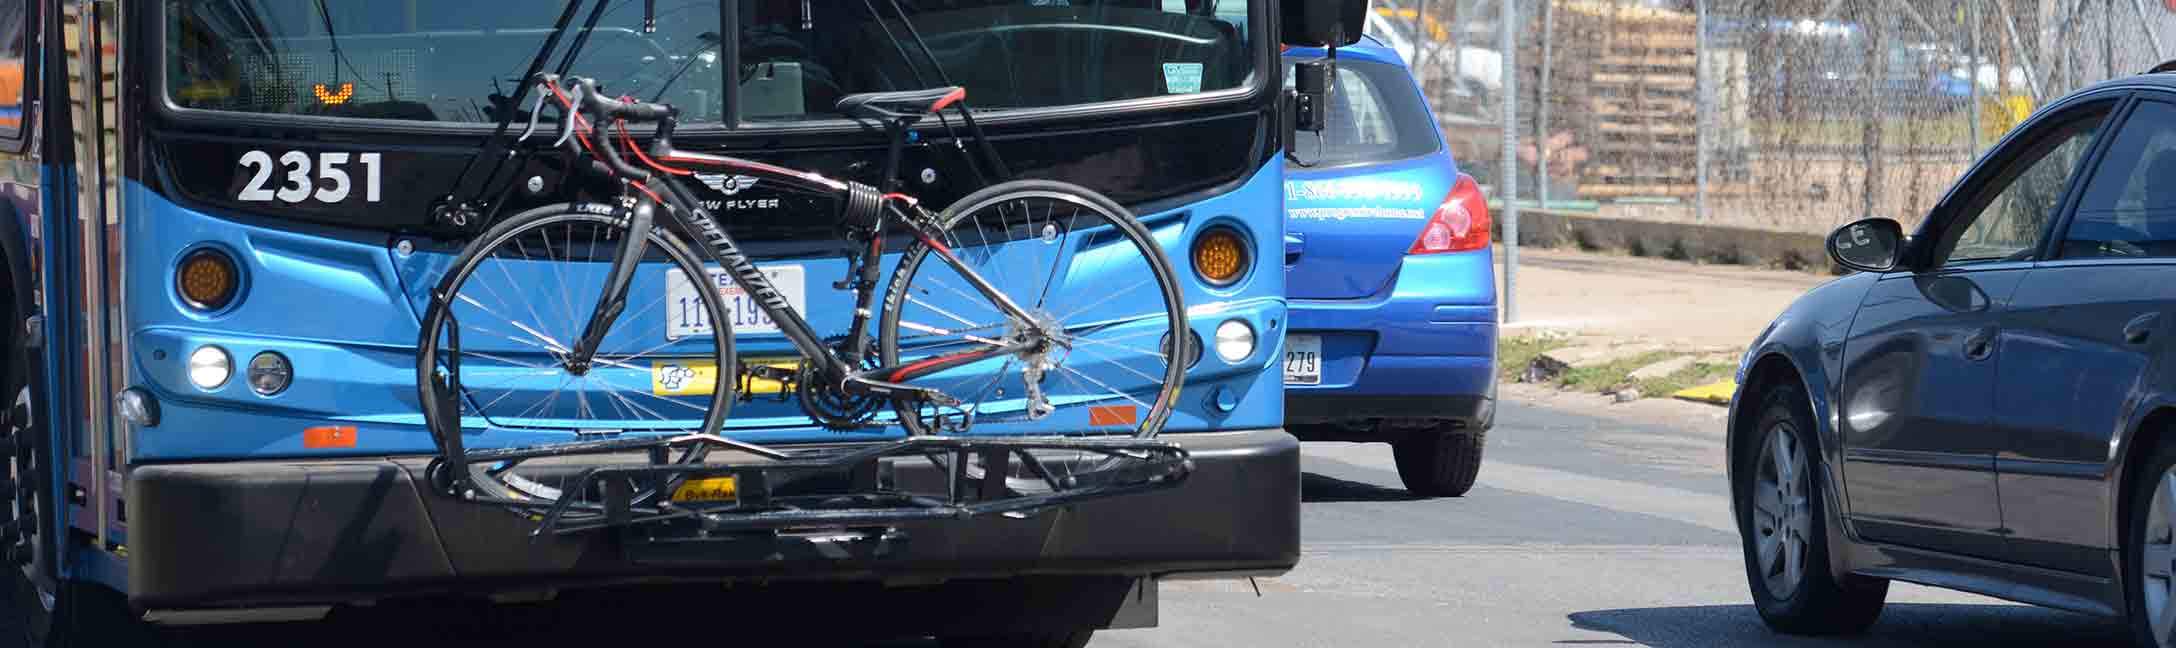 bicycle on front of bus